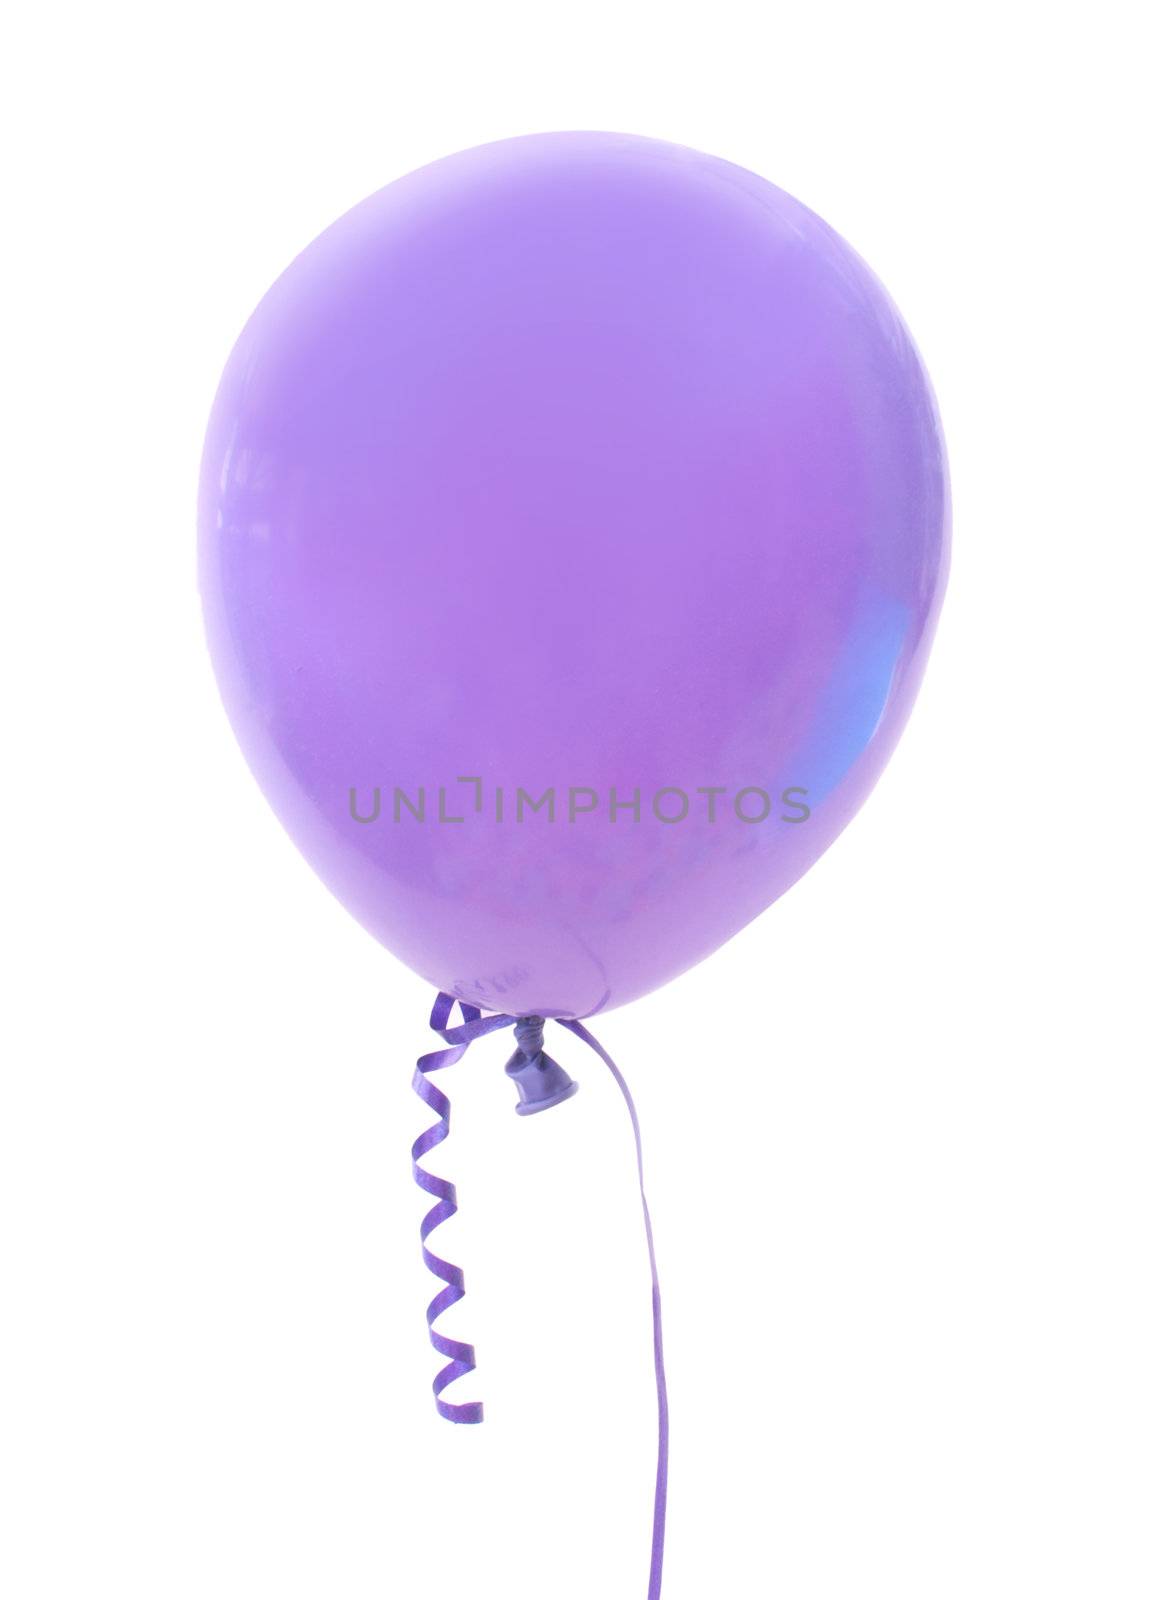 Purple balloon floating against a white background